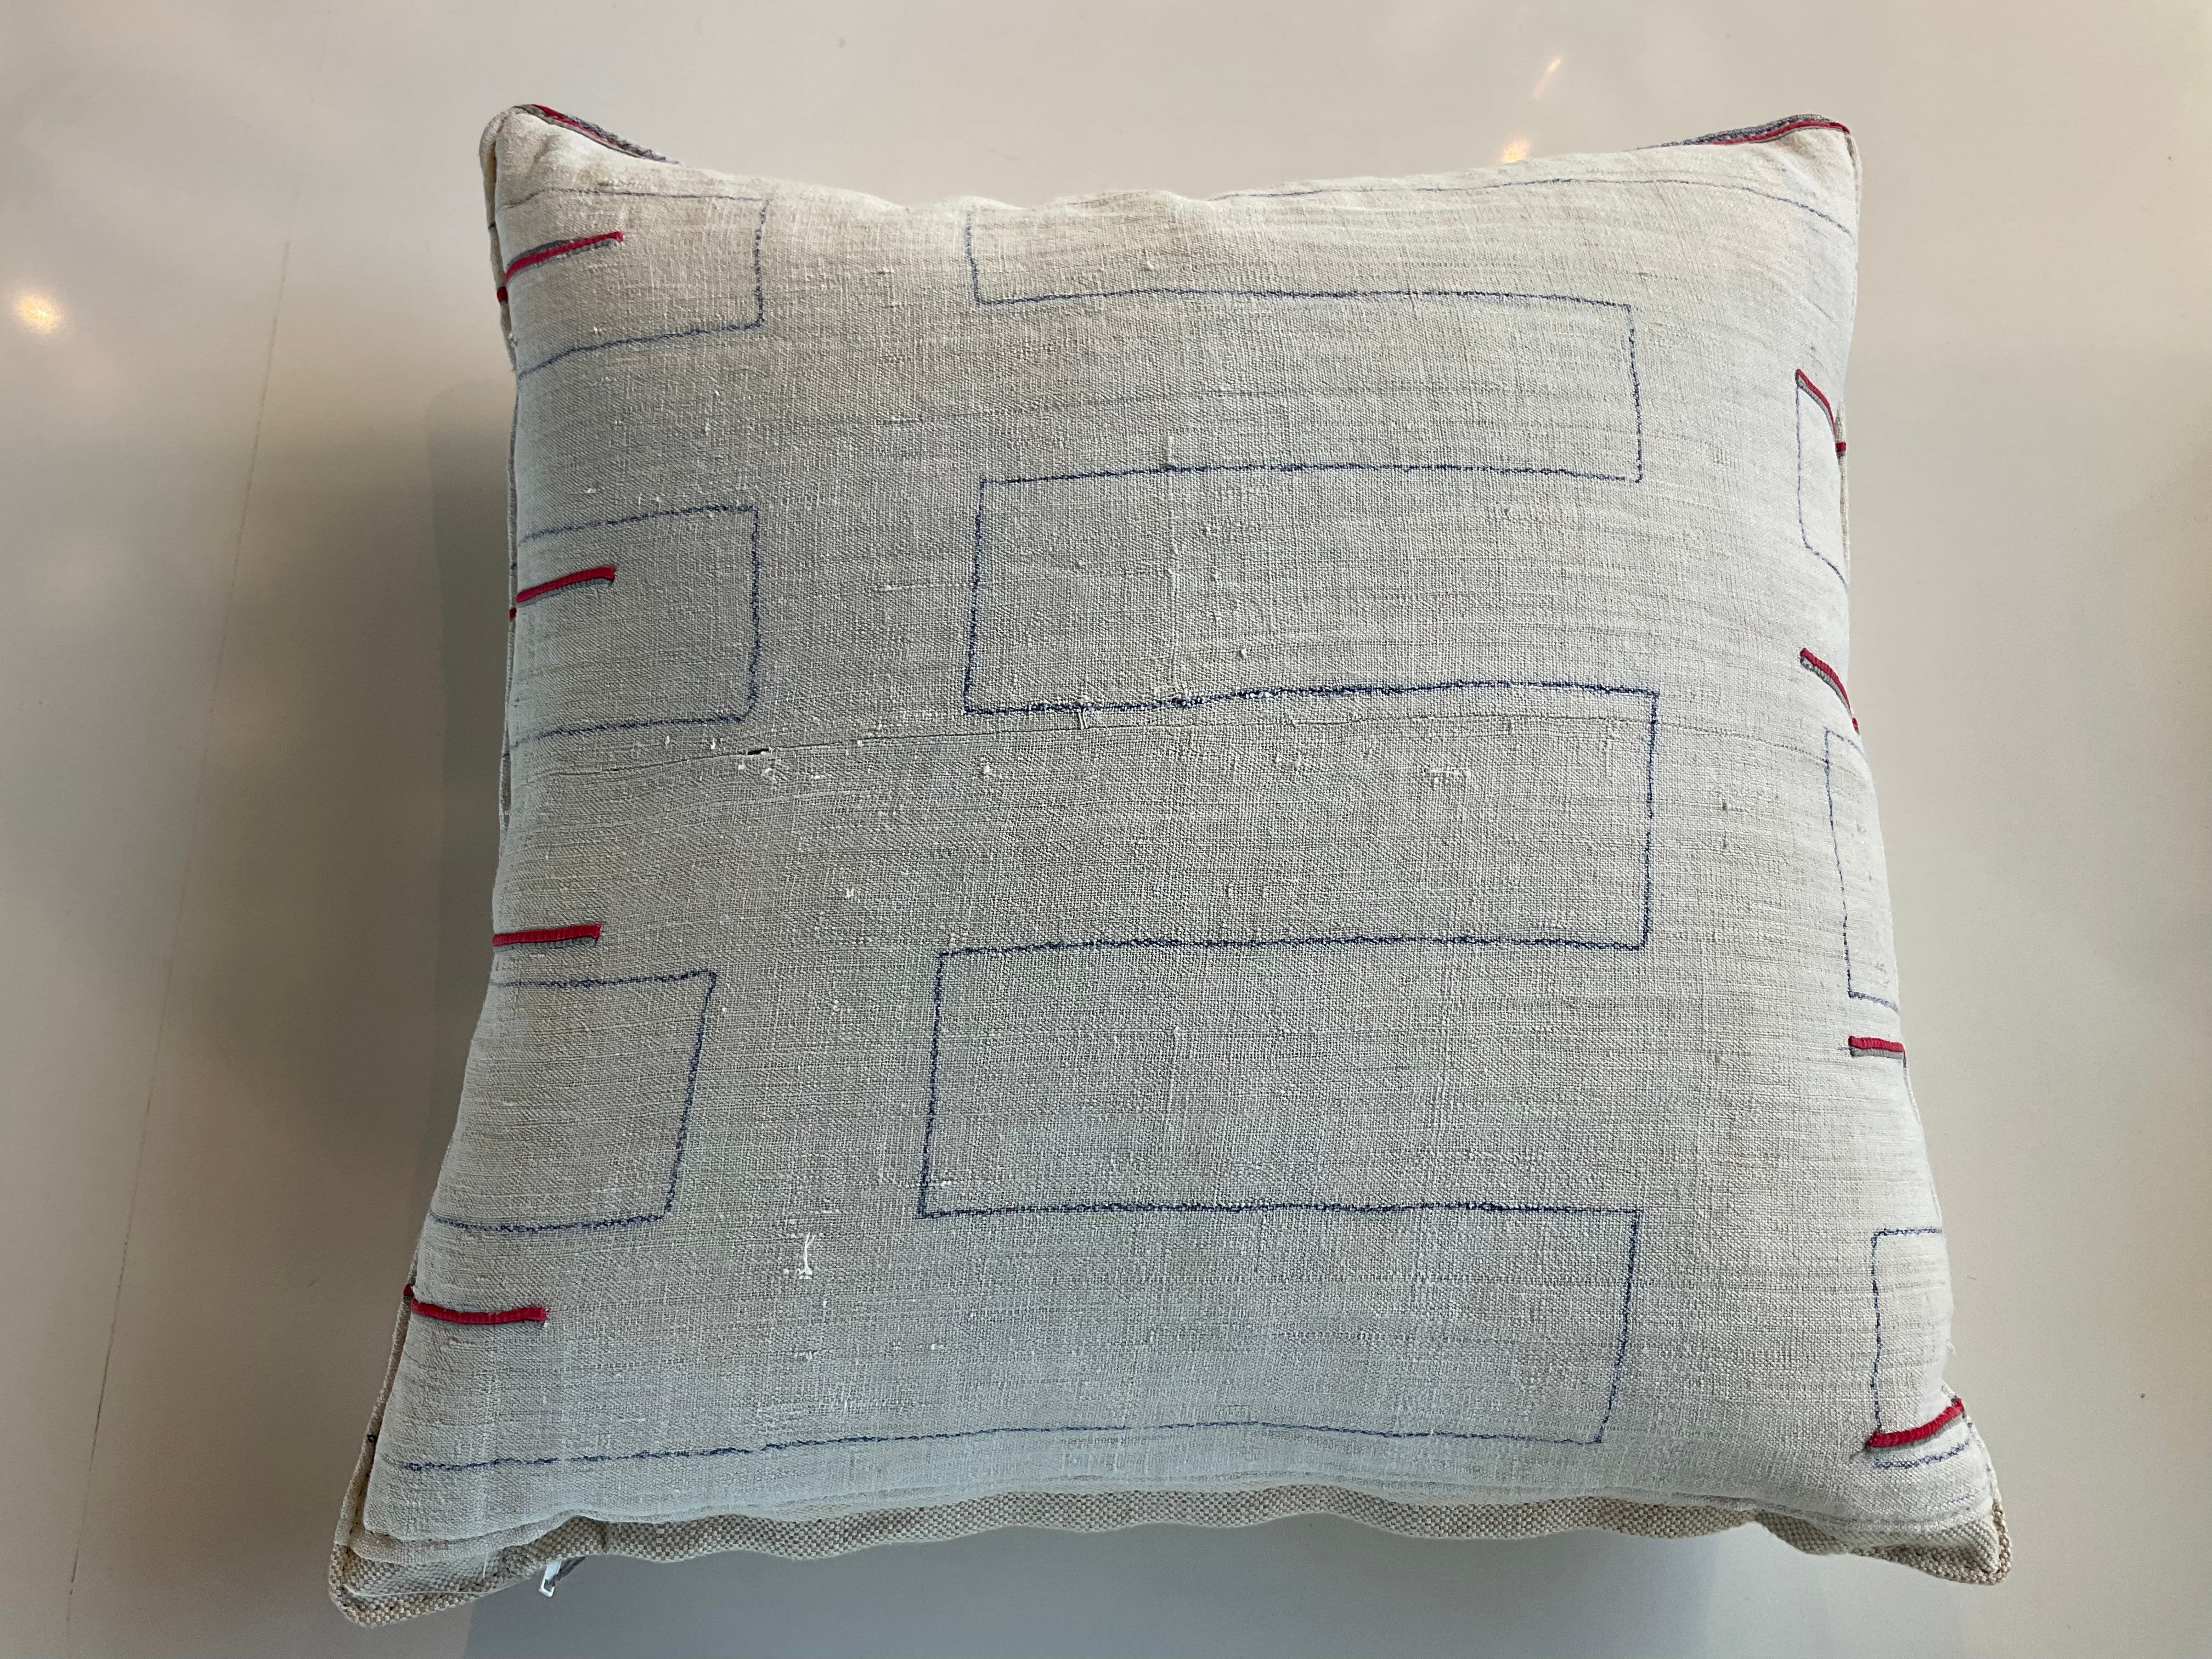 ONE OF A KIND HANDMADE PILLOW